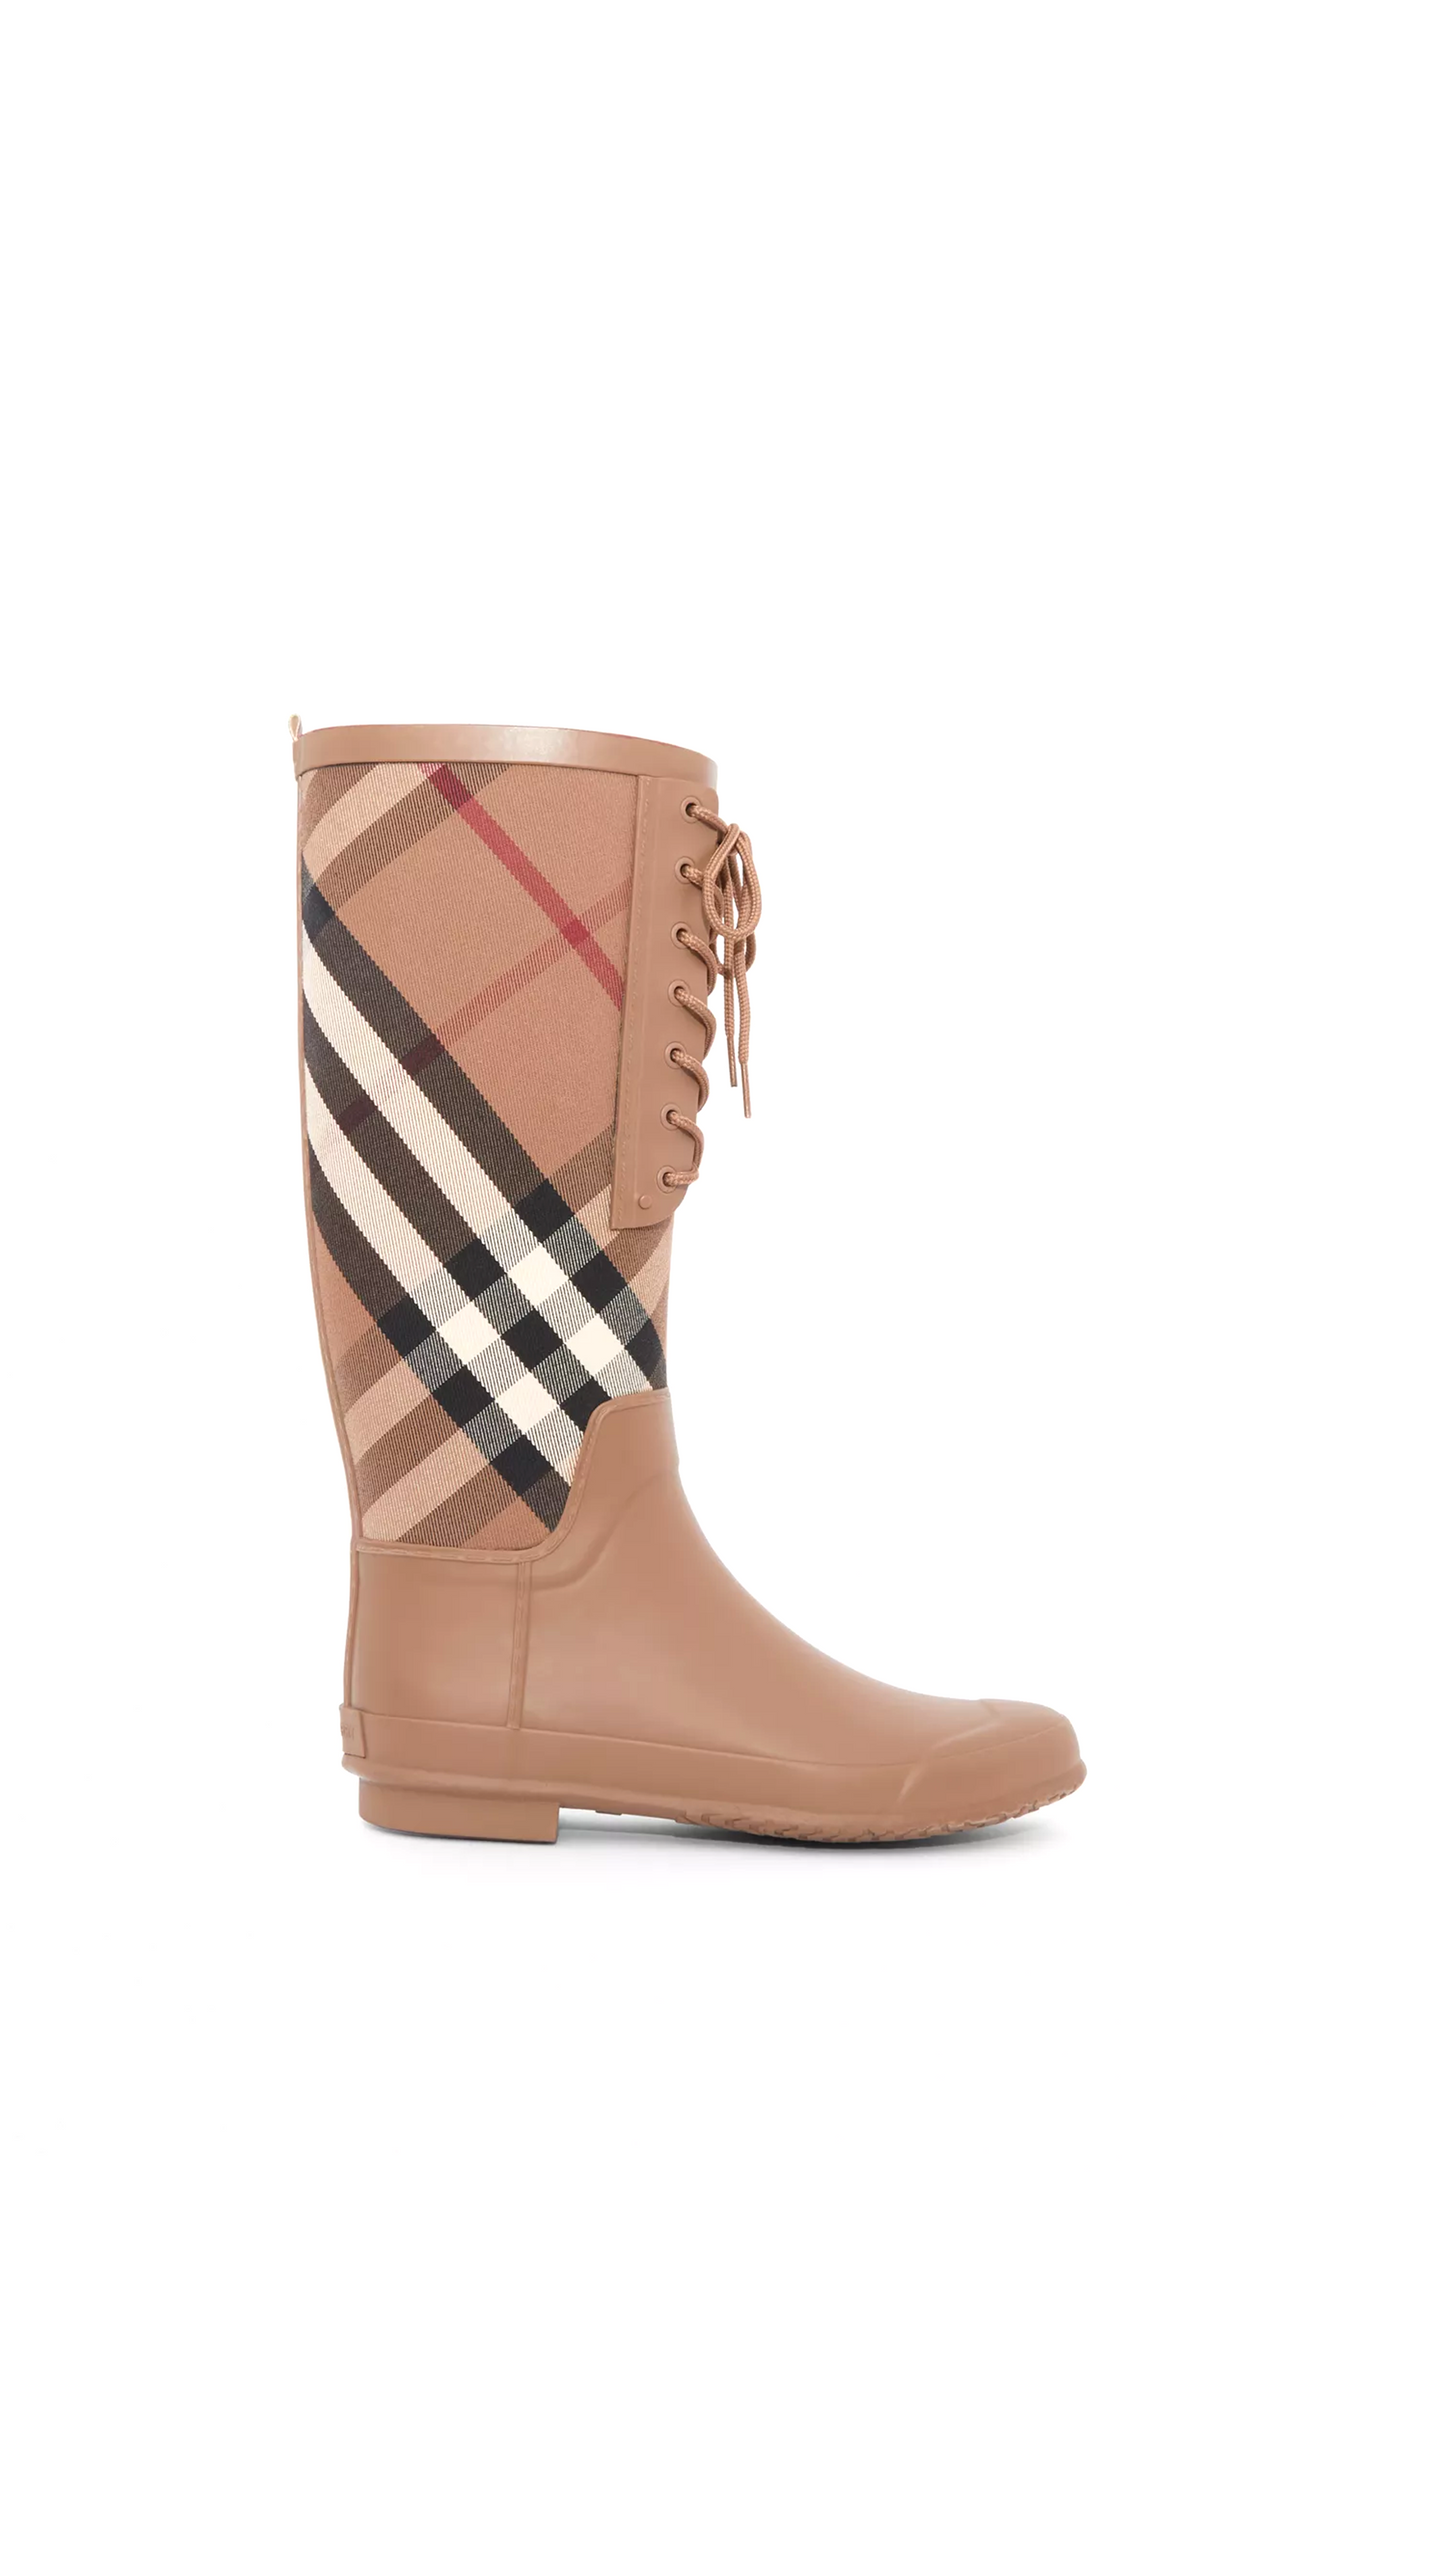 Vintage Check and Rubber Rain Boots - Birch Brown